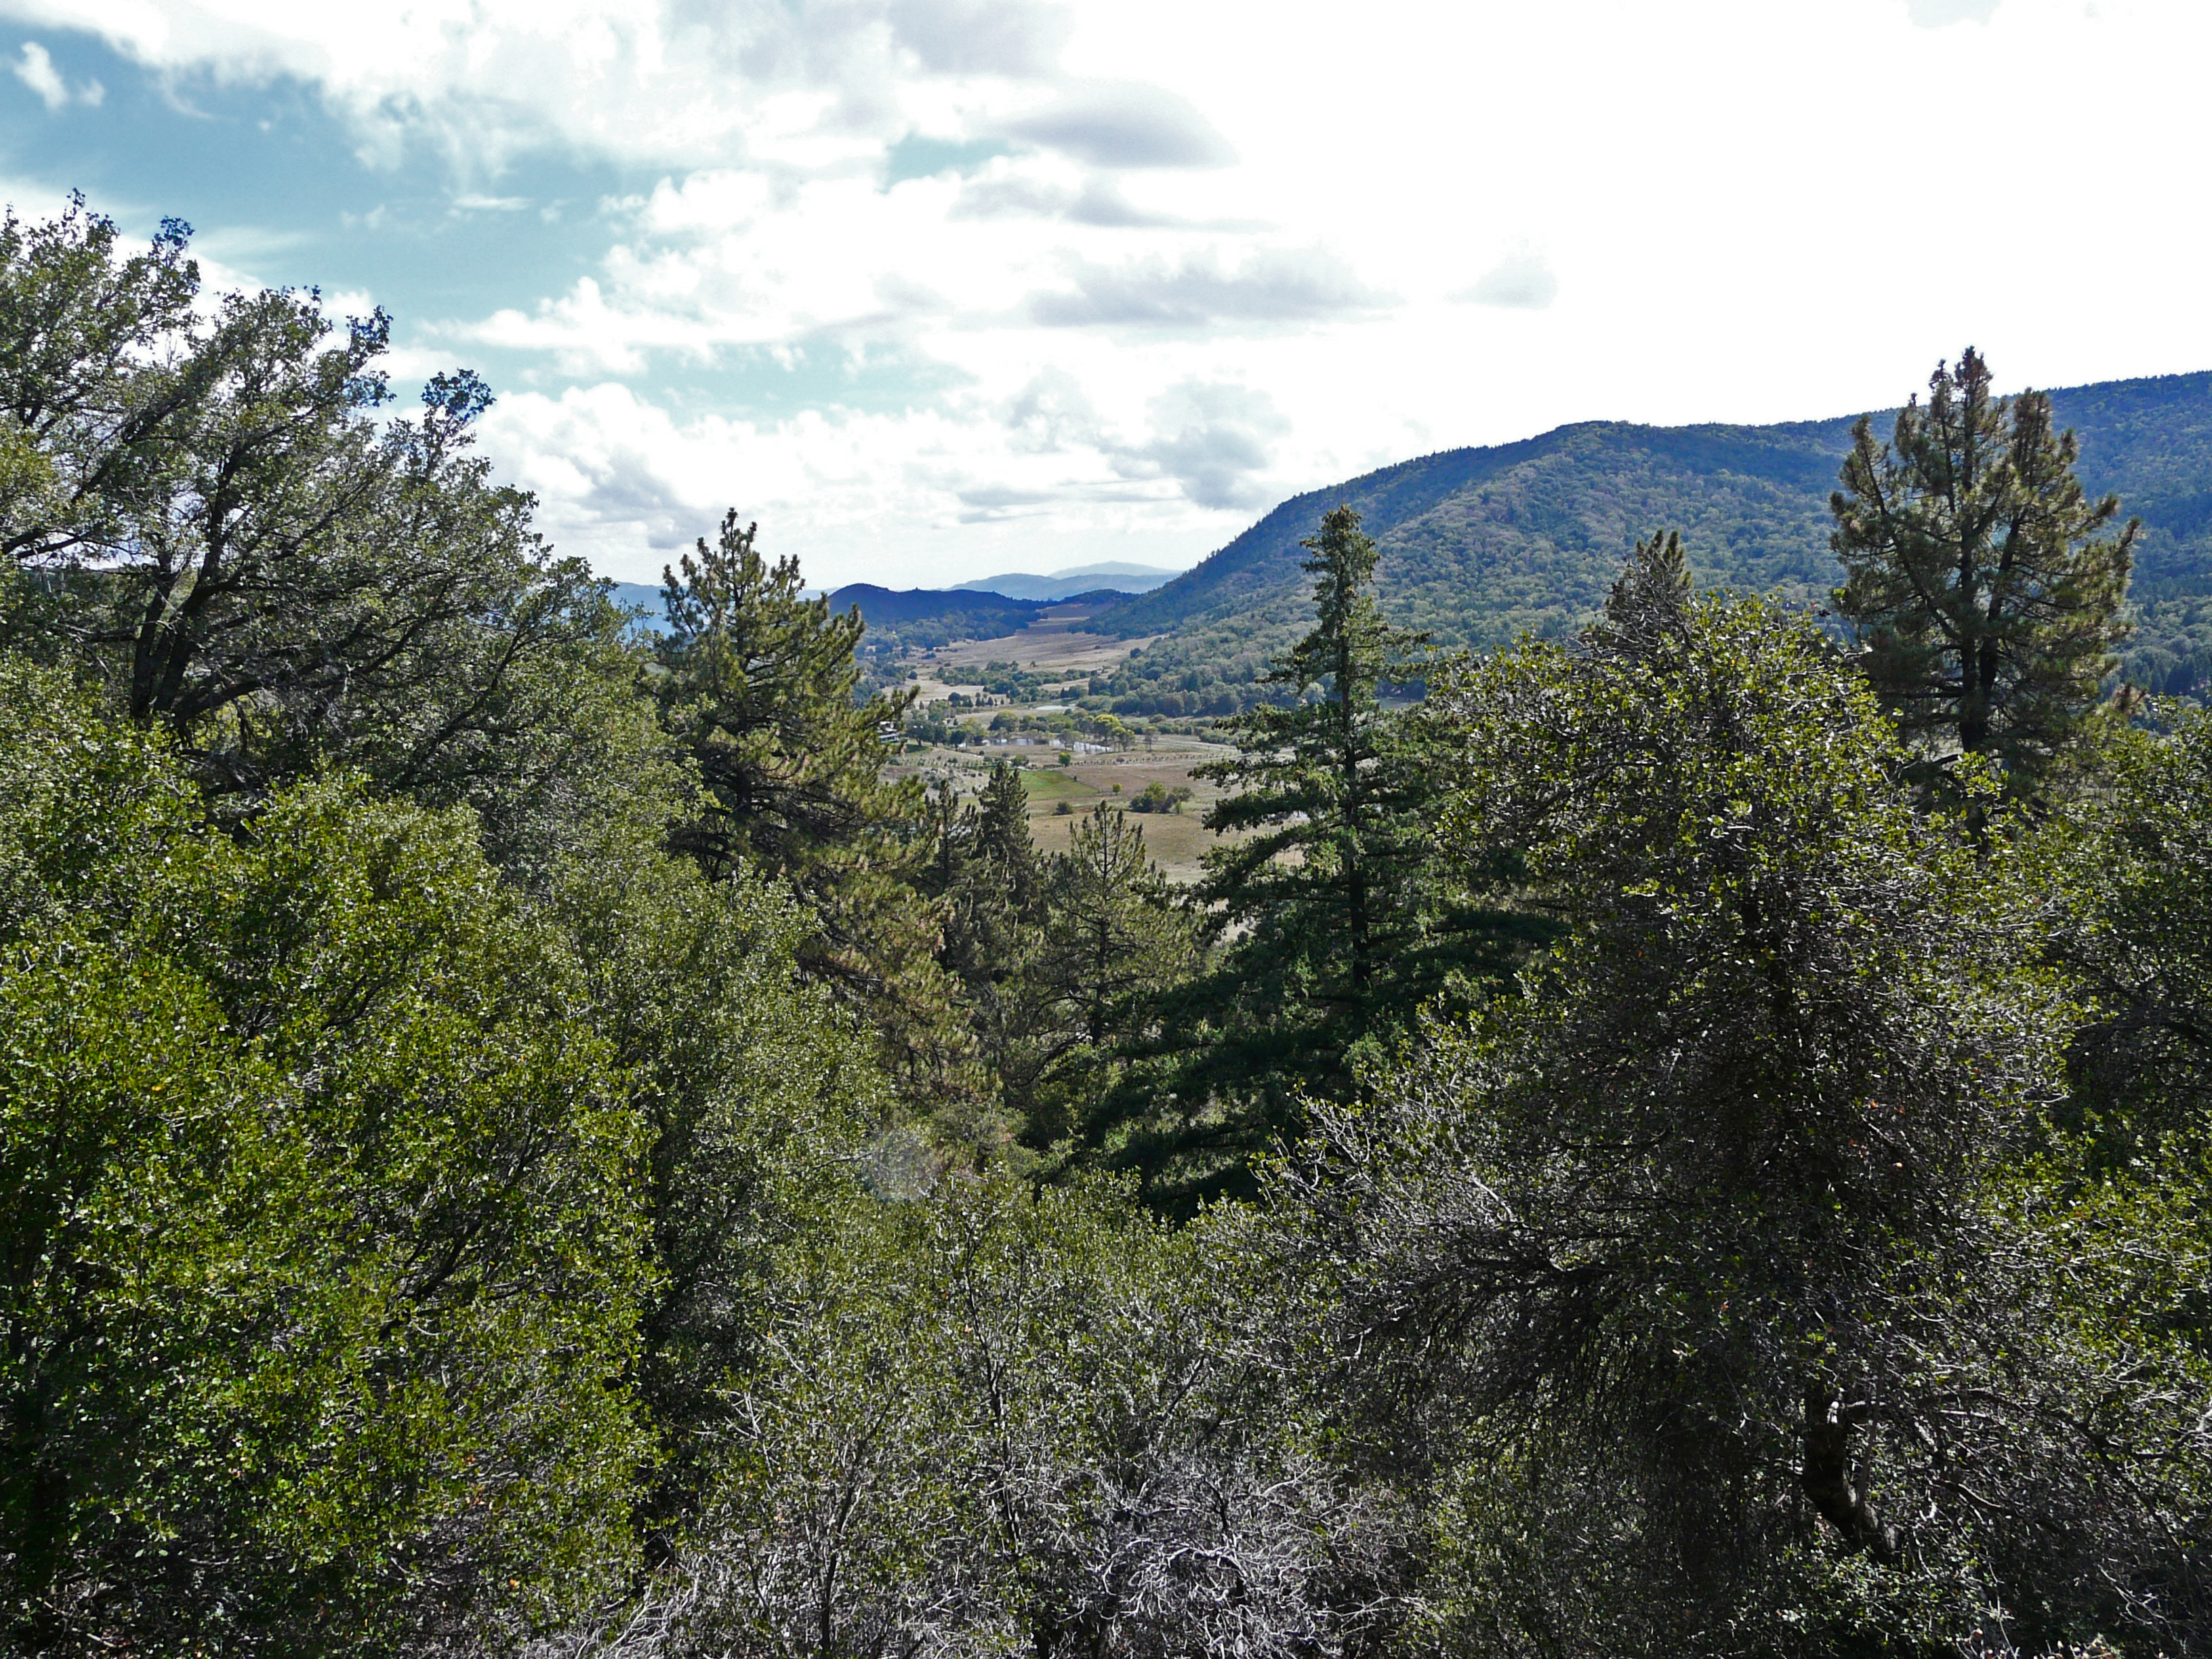 View of Mendenhall Valley from Mendenhall Valley Outlook